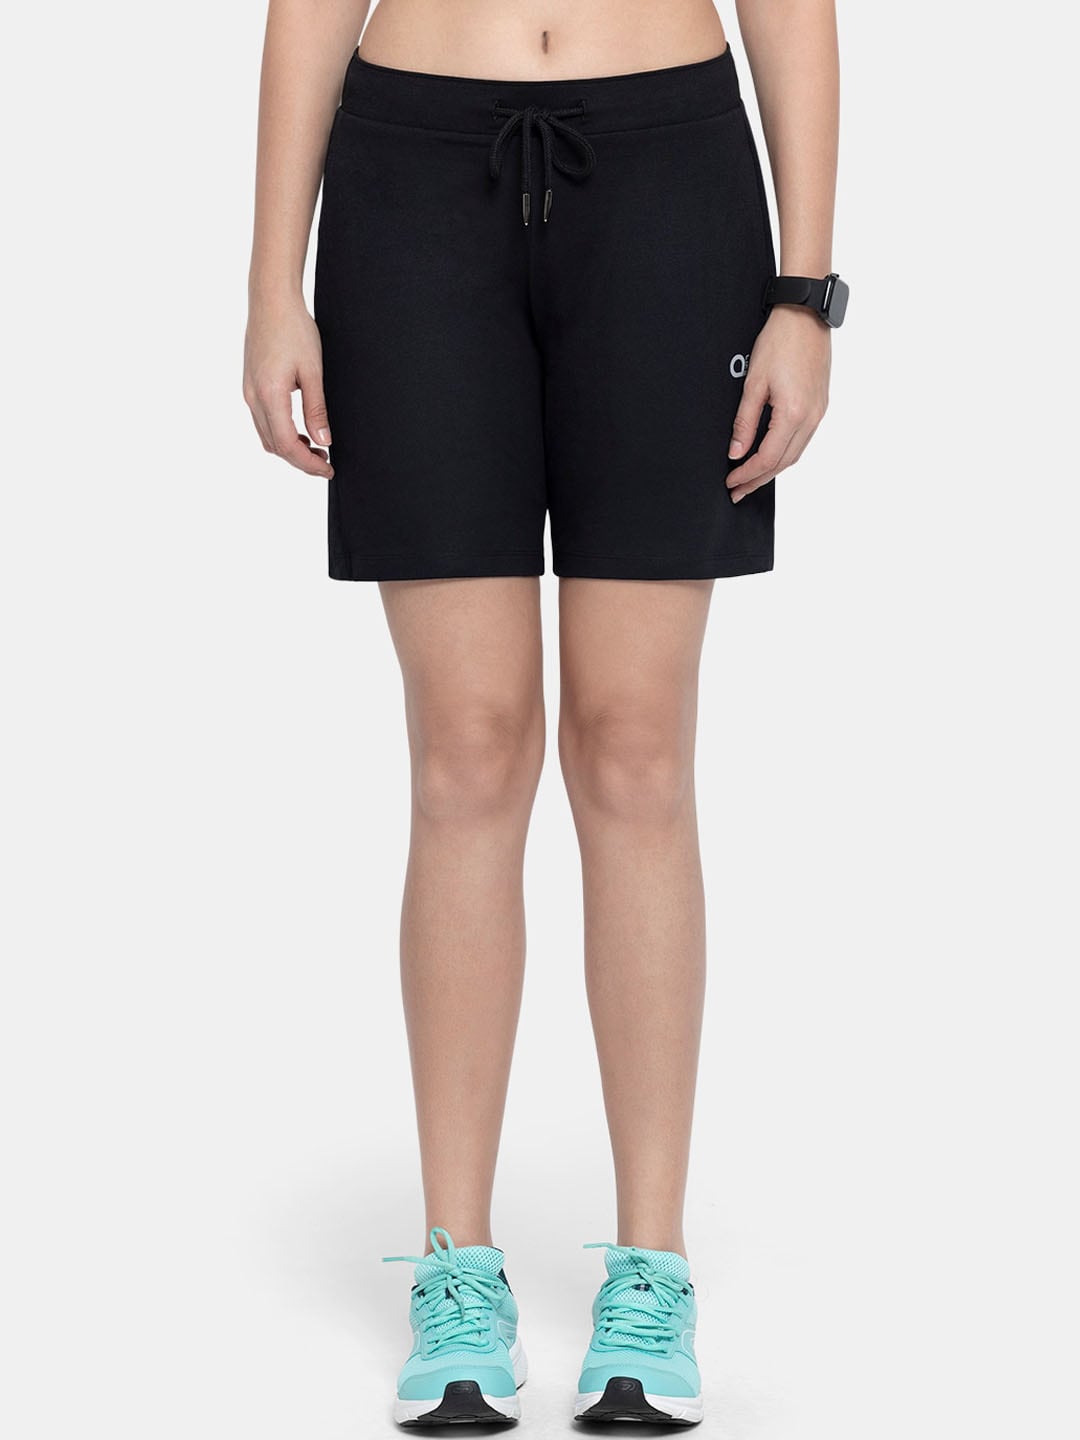 Amante Women Black Low-Rise Running Sports Shorts Price in India